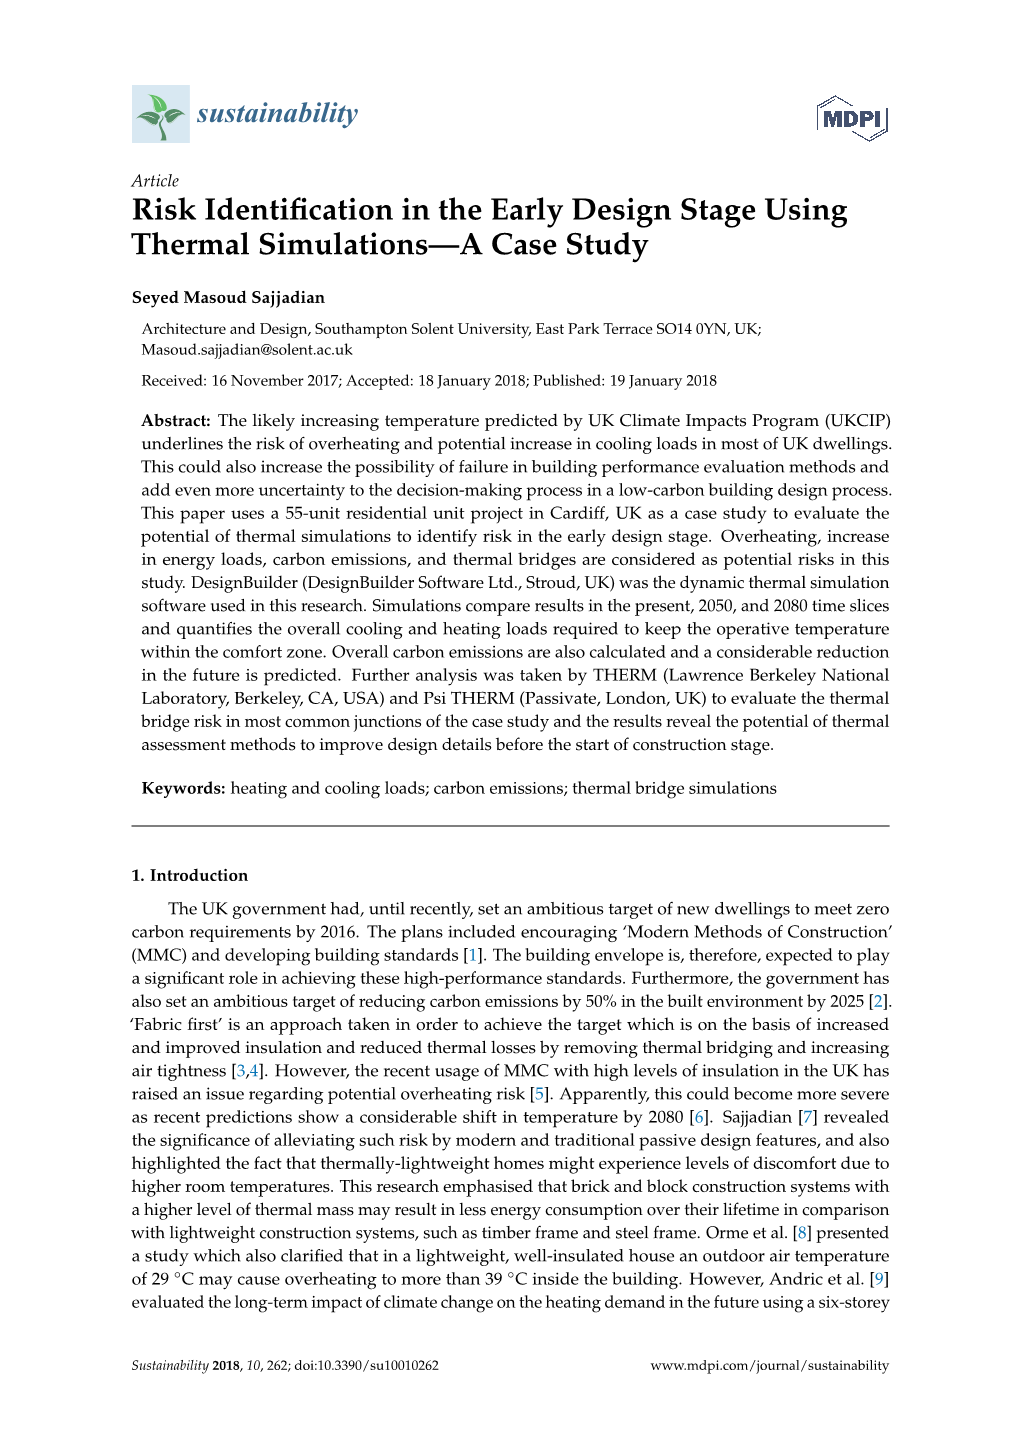 Risk Identification in the Early Design Stage Using Thermal Simulations—A Case Study